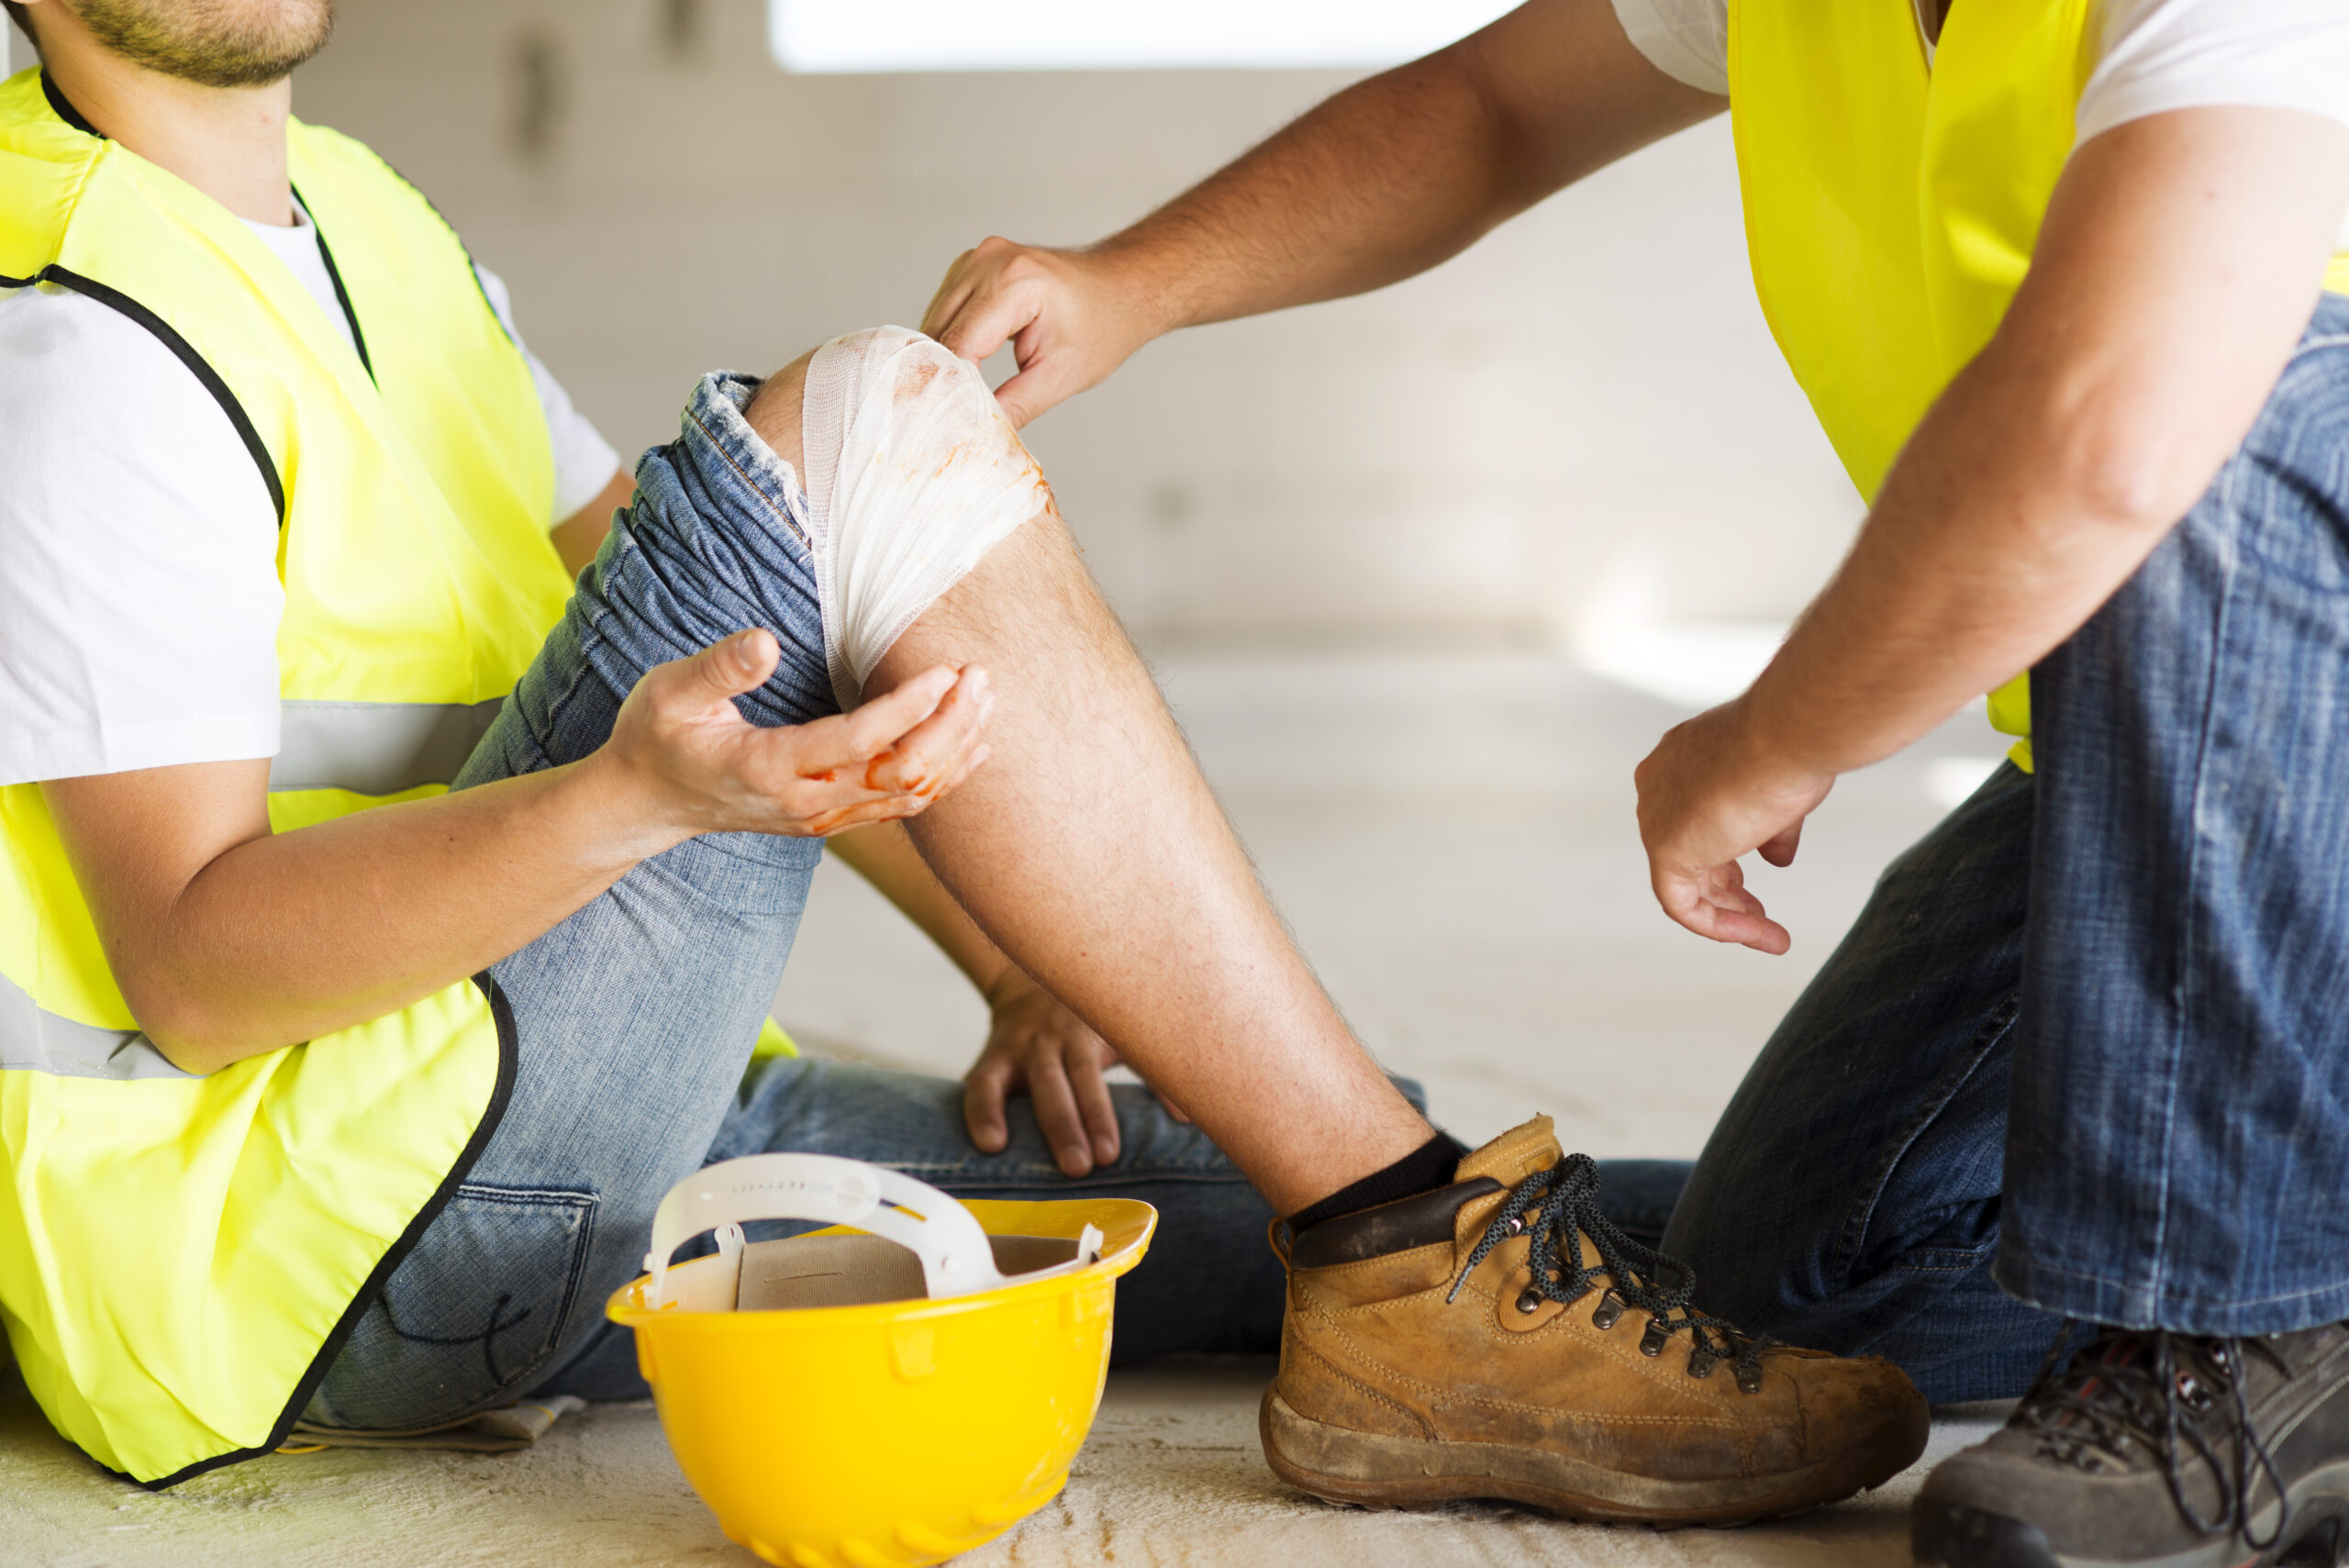 Common Causes of Personal Injuries in Alabama & How to Prevent Them